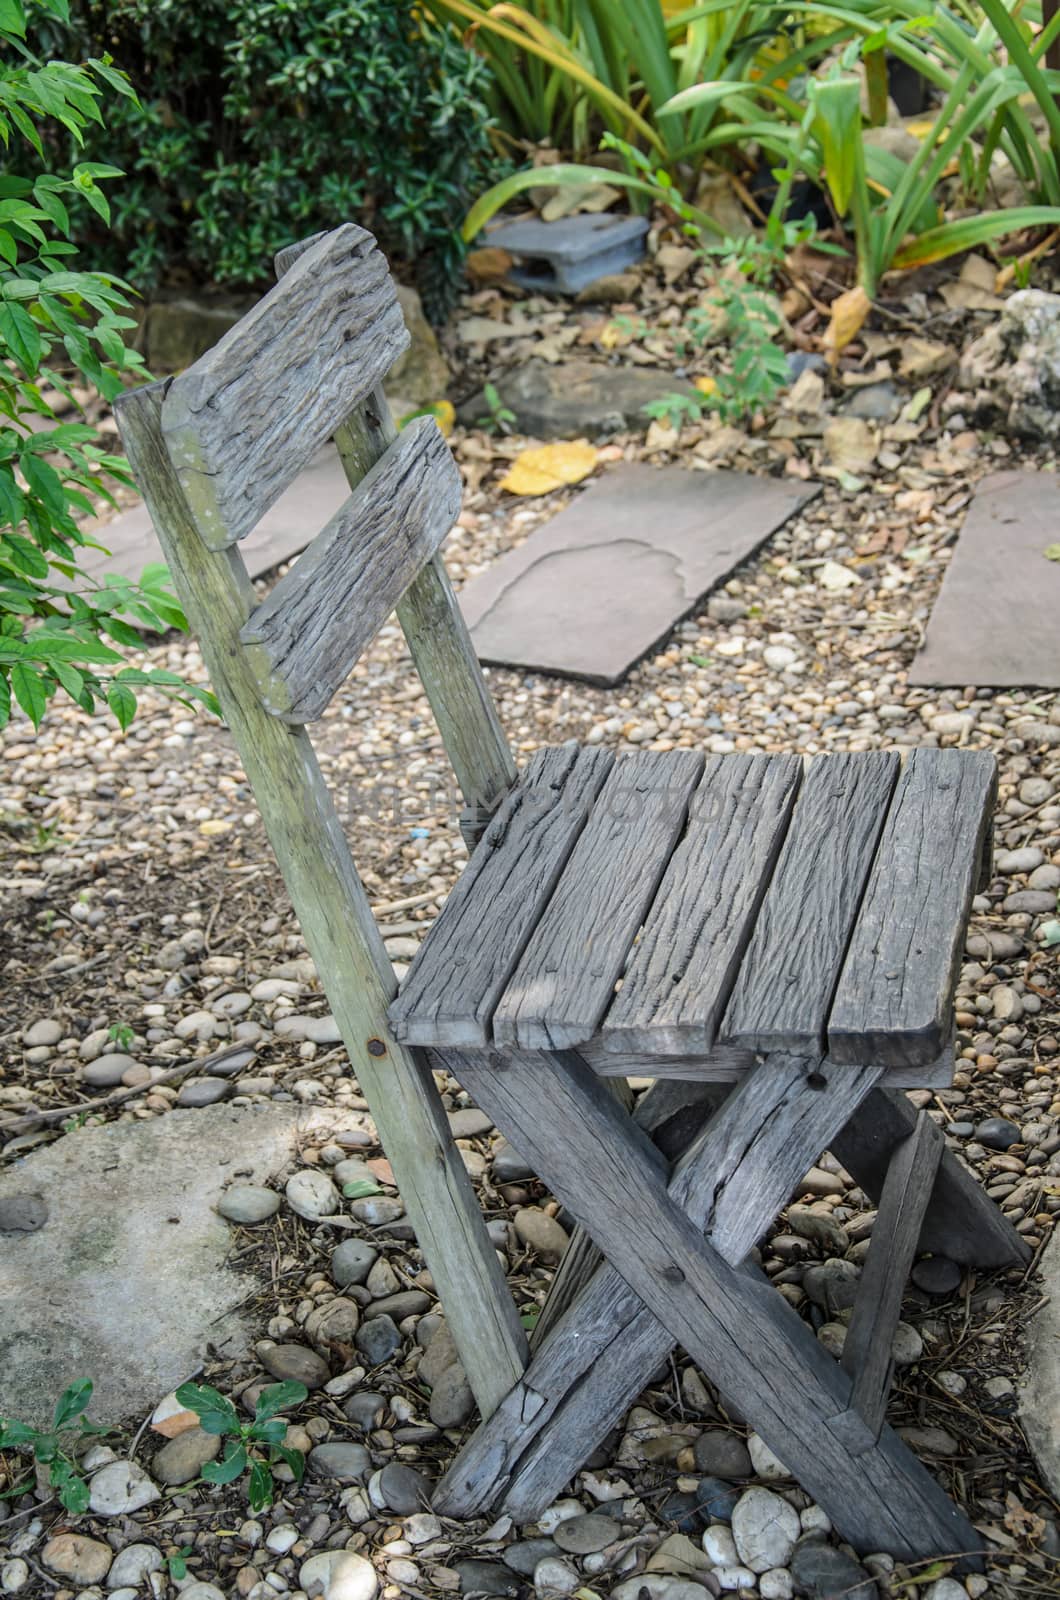 Old wooden chair sitting  in the garden